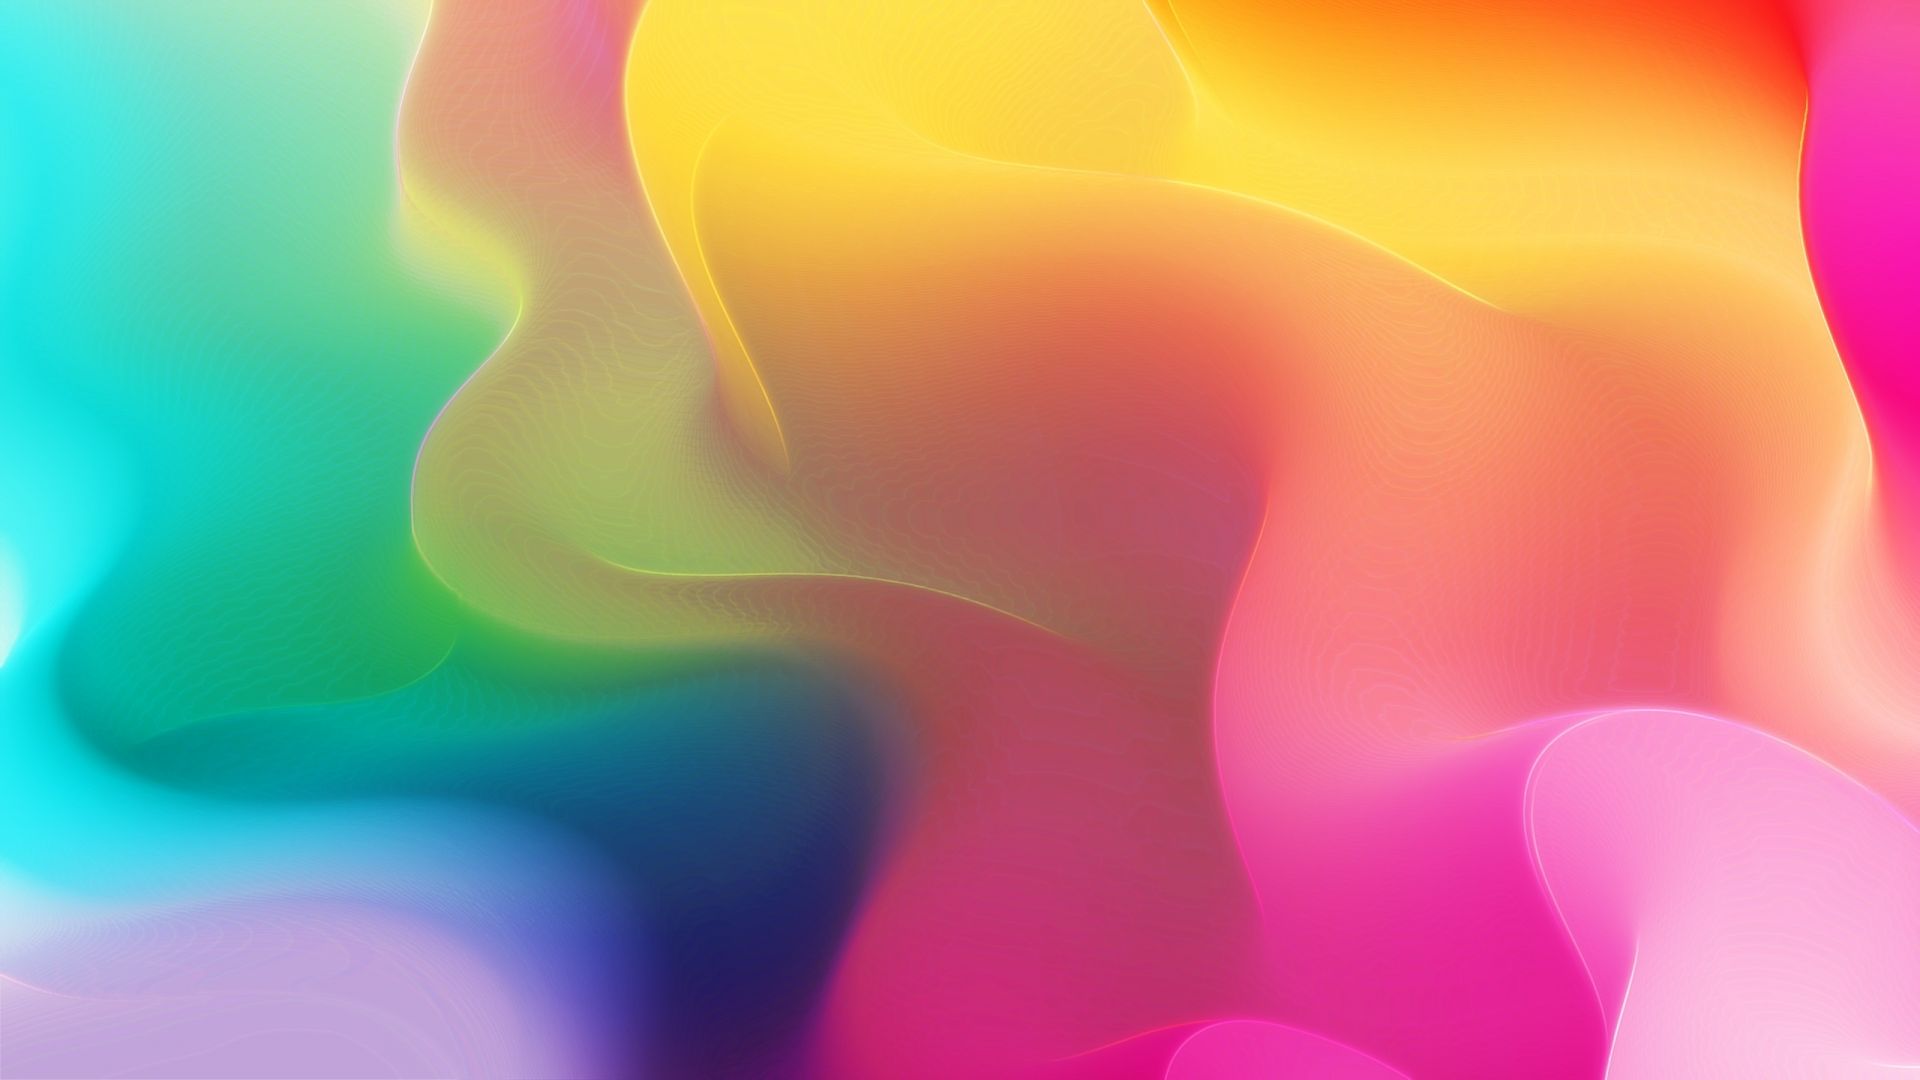 Desktop Wallpaper Abstract Colorful Smooth Gradient HD Image